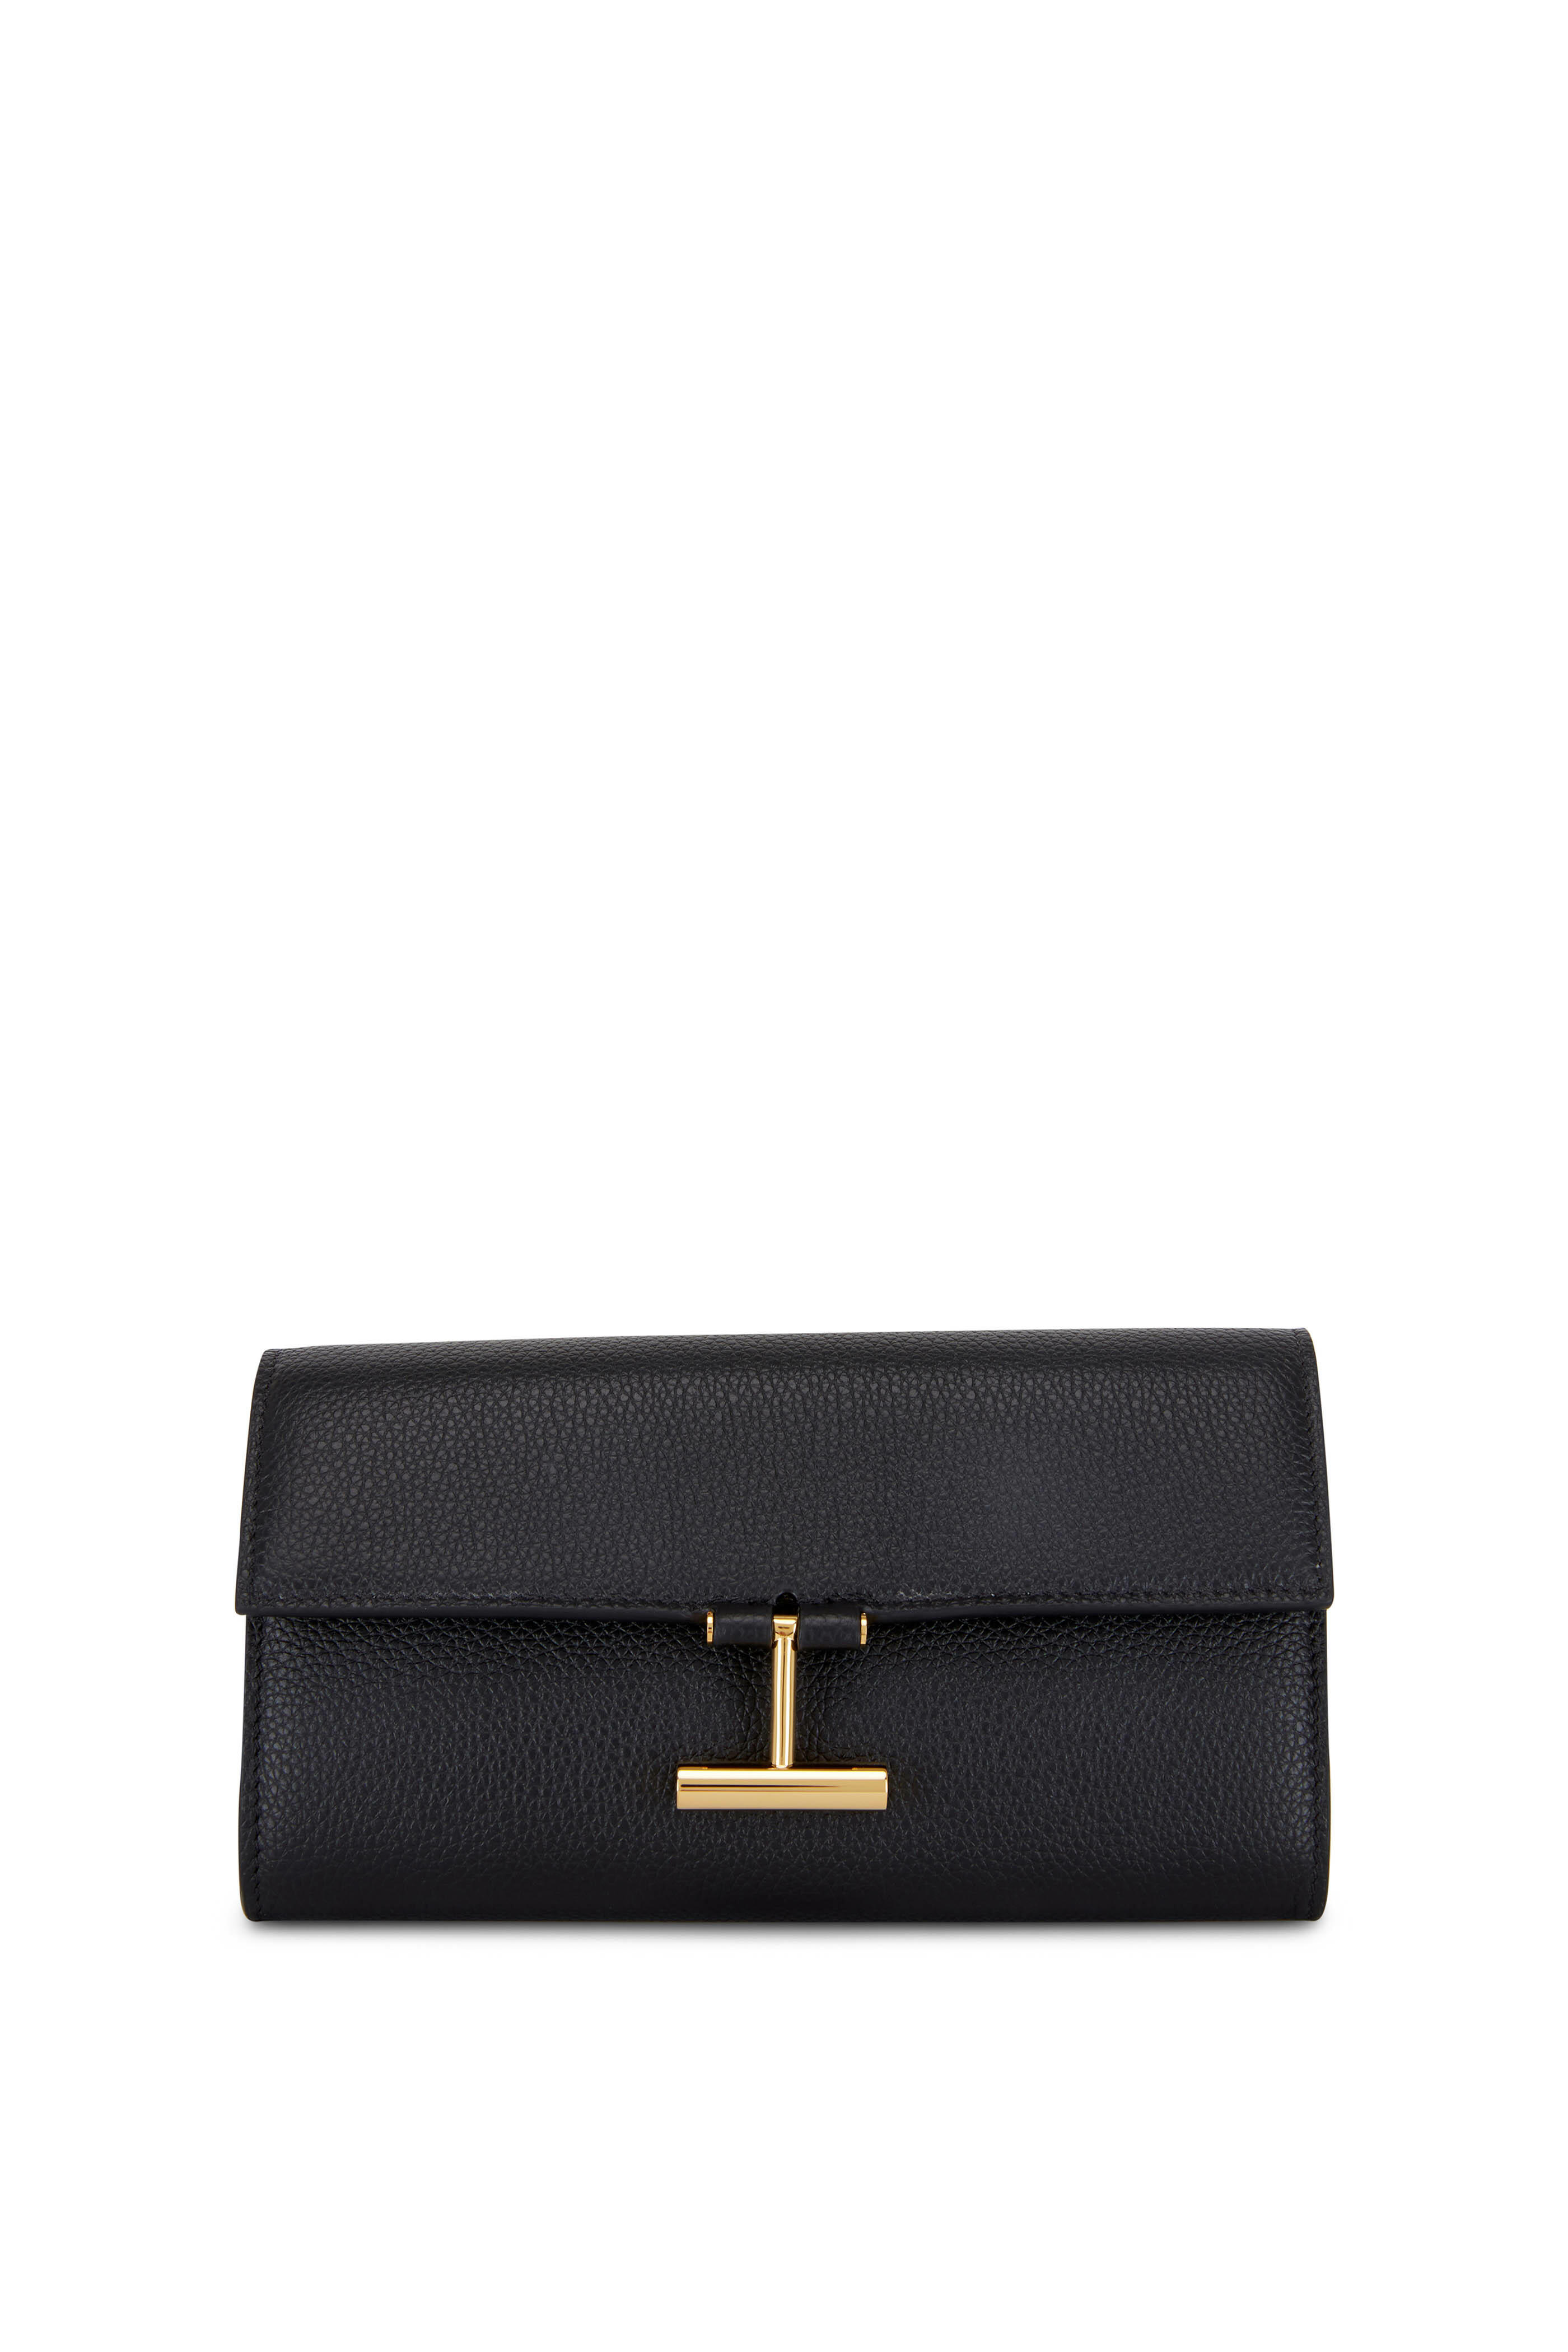 Tom Ford - Black Grained Leather Continental Wallet